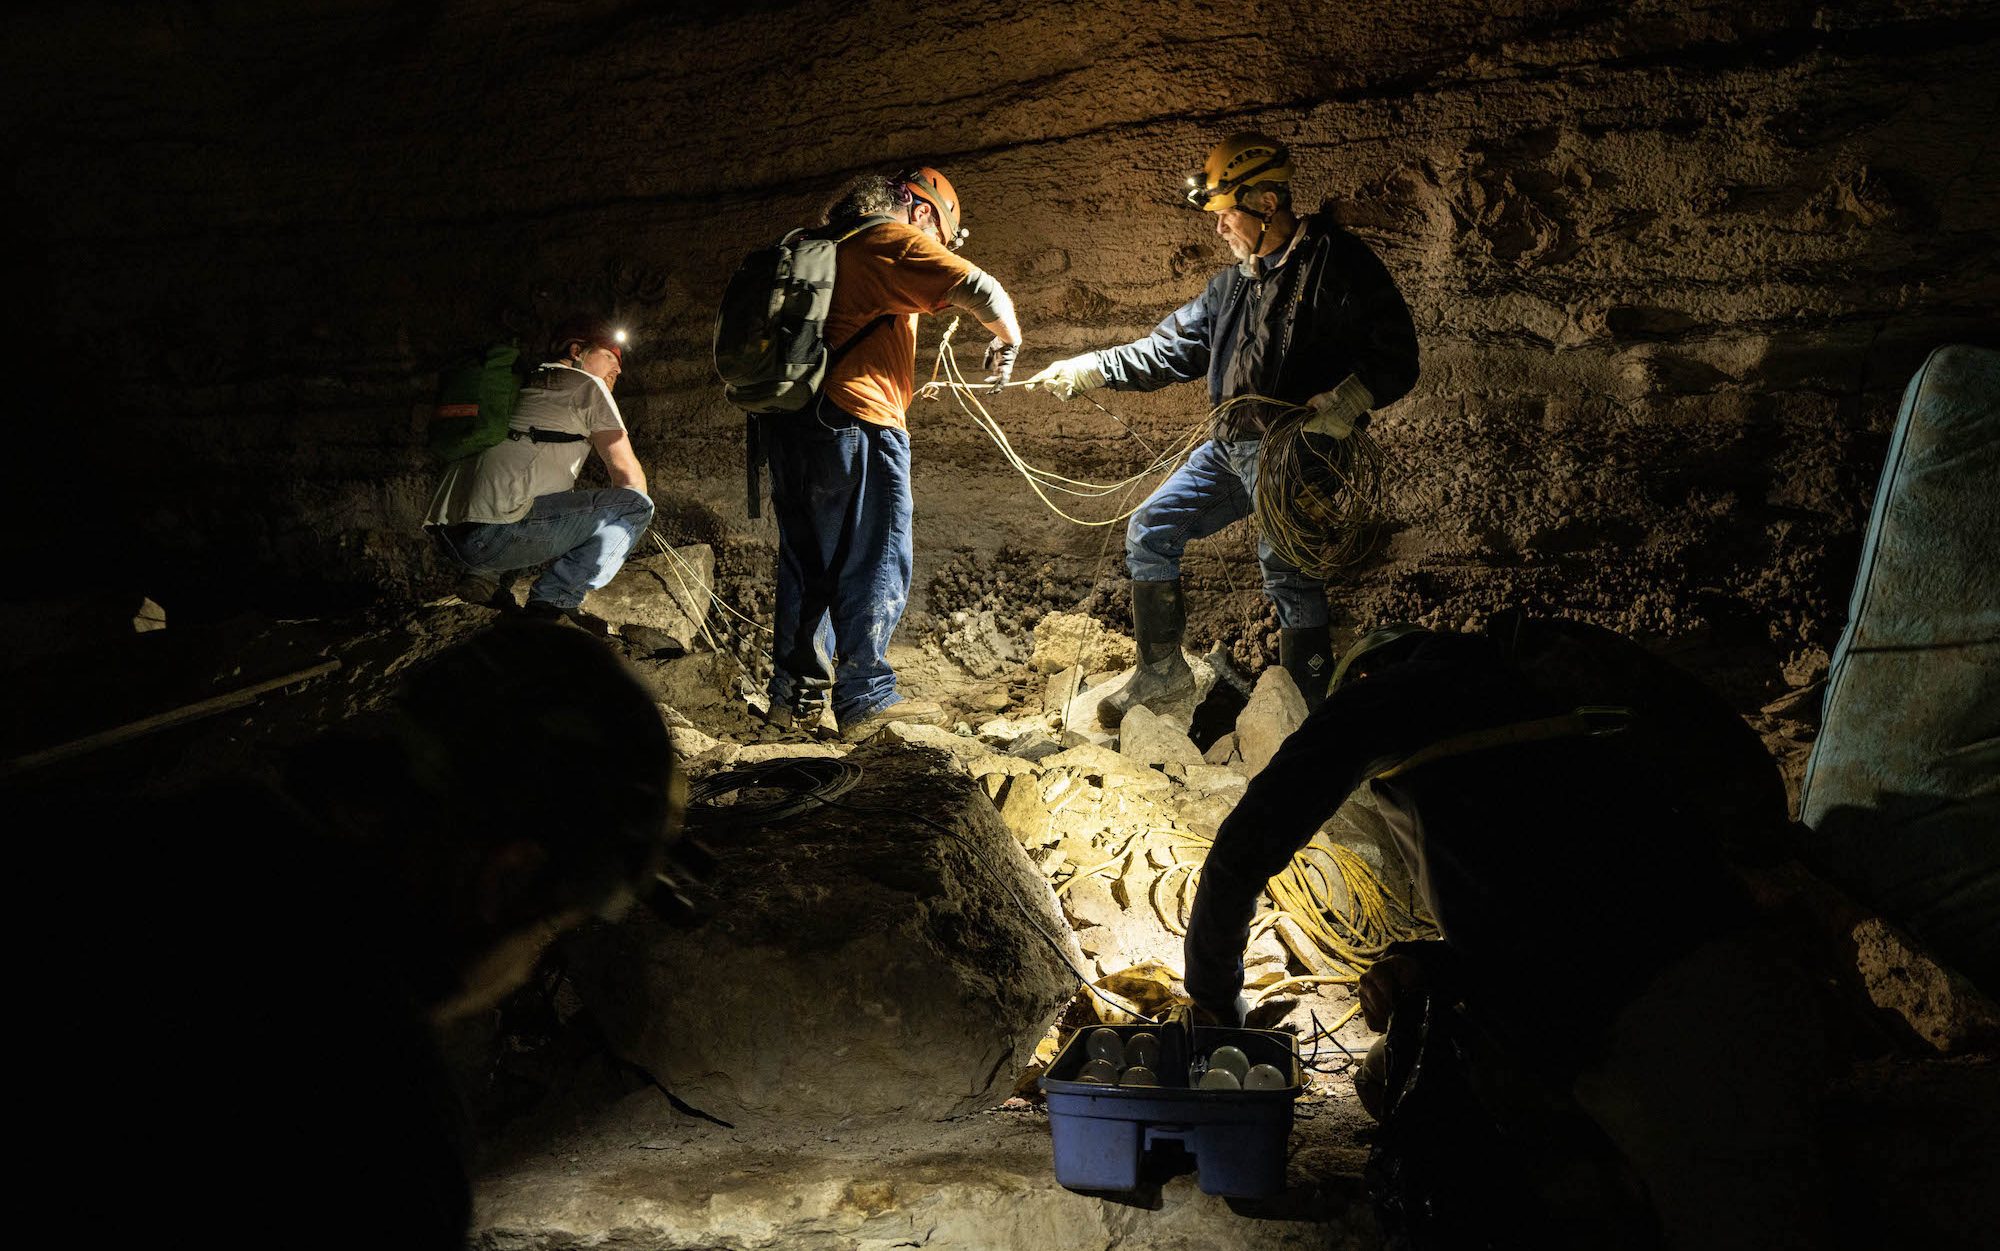 people standing inside a cave with lights and photography equiptment